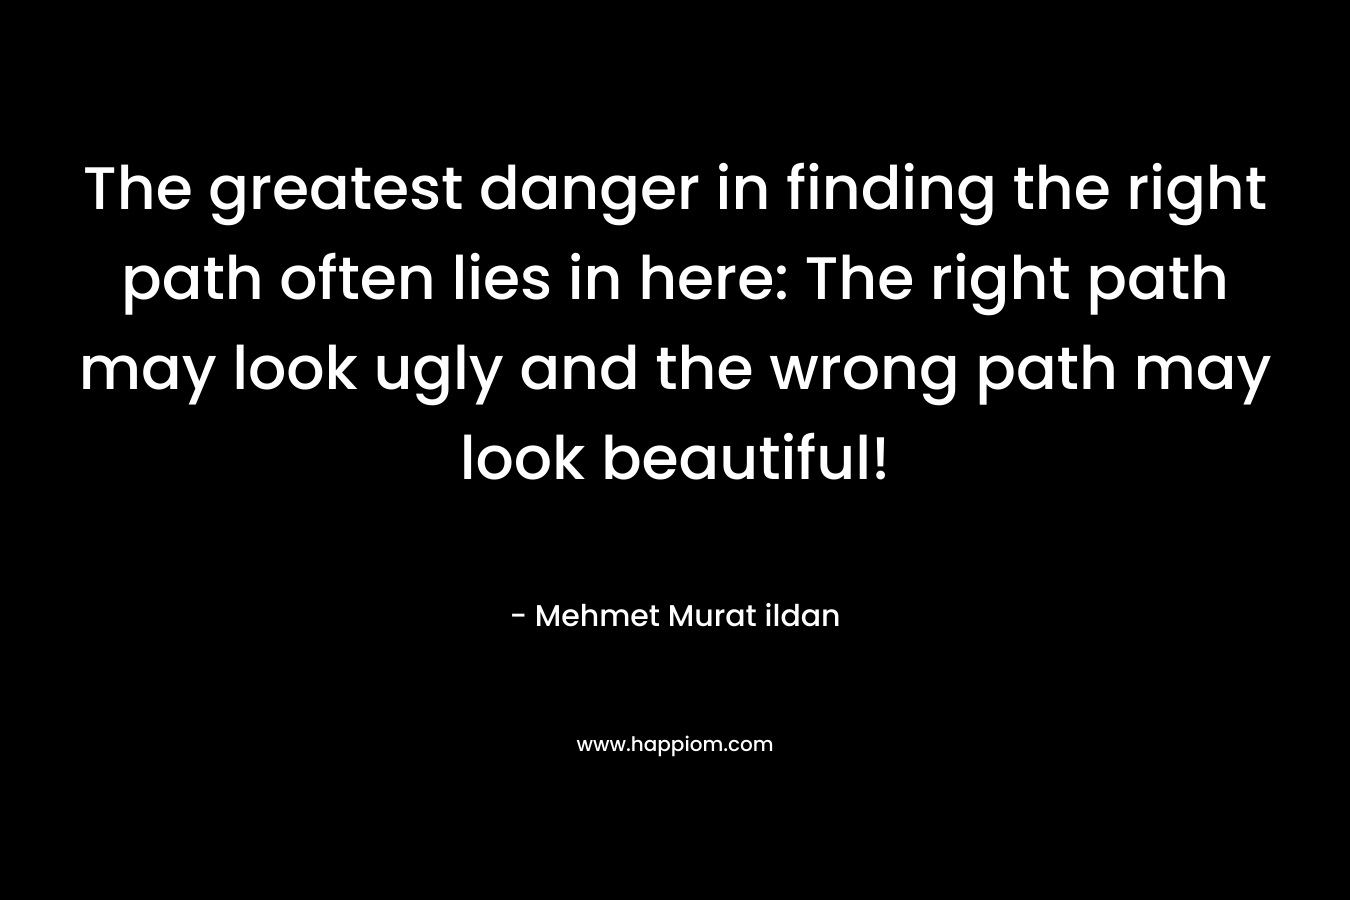 The greatest danger in finding the right path often lies in here: The right path may look ugly and the wrong path may look beautiful!